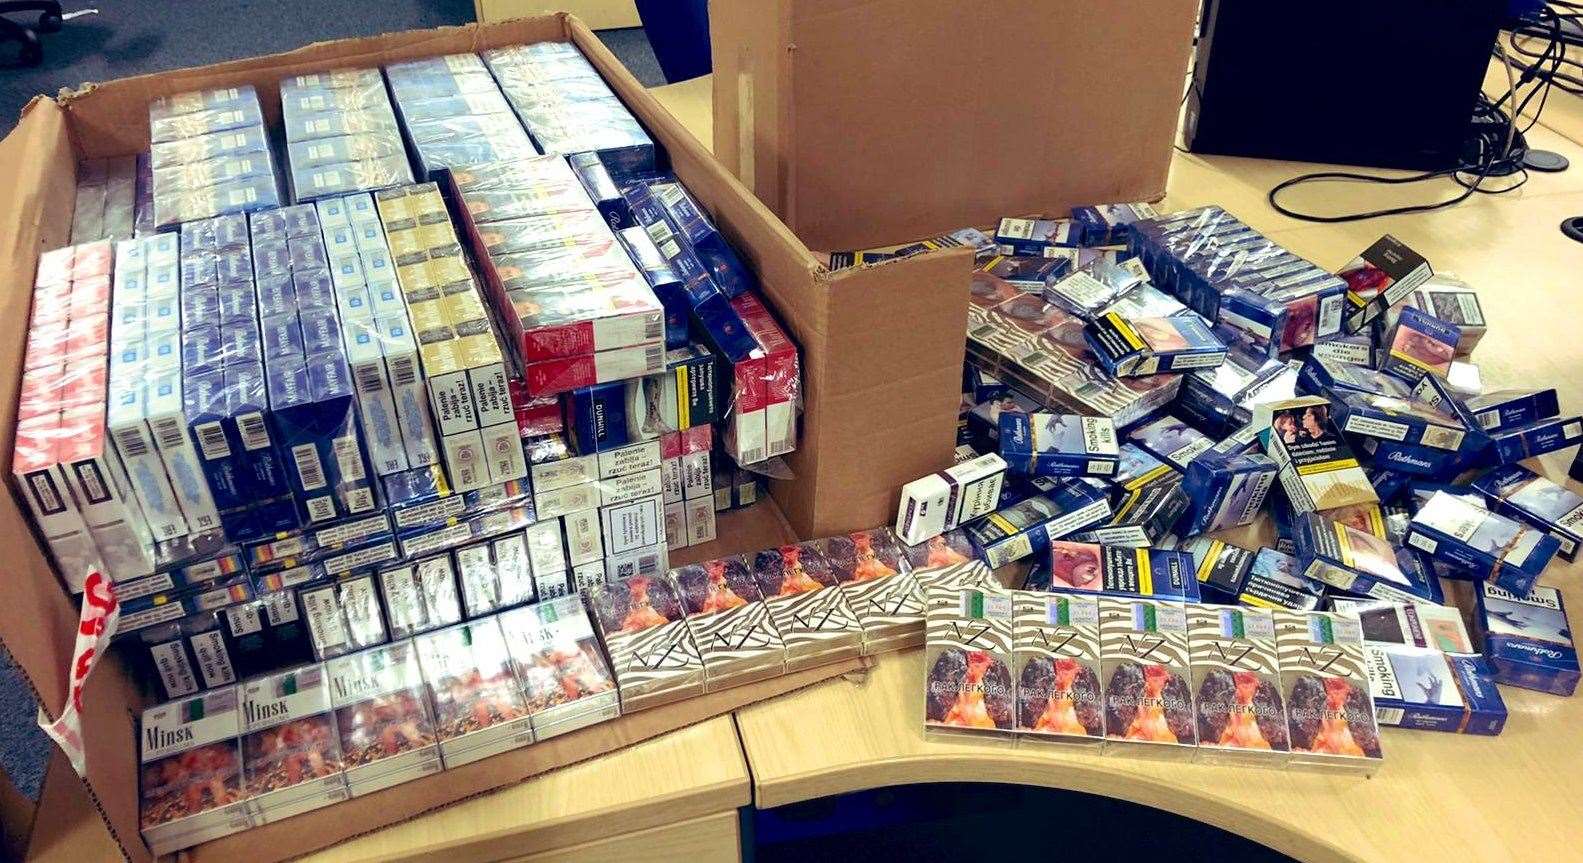 The haul of illegal cigarettes found in the boot of a car in Medway. Picture: Kent Police Medway